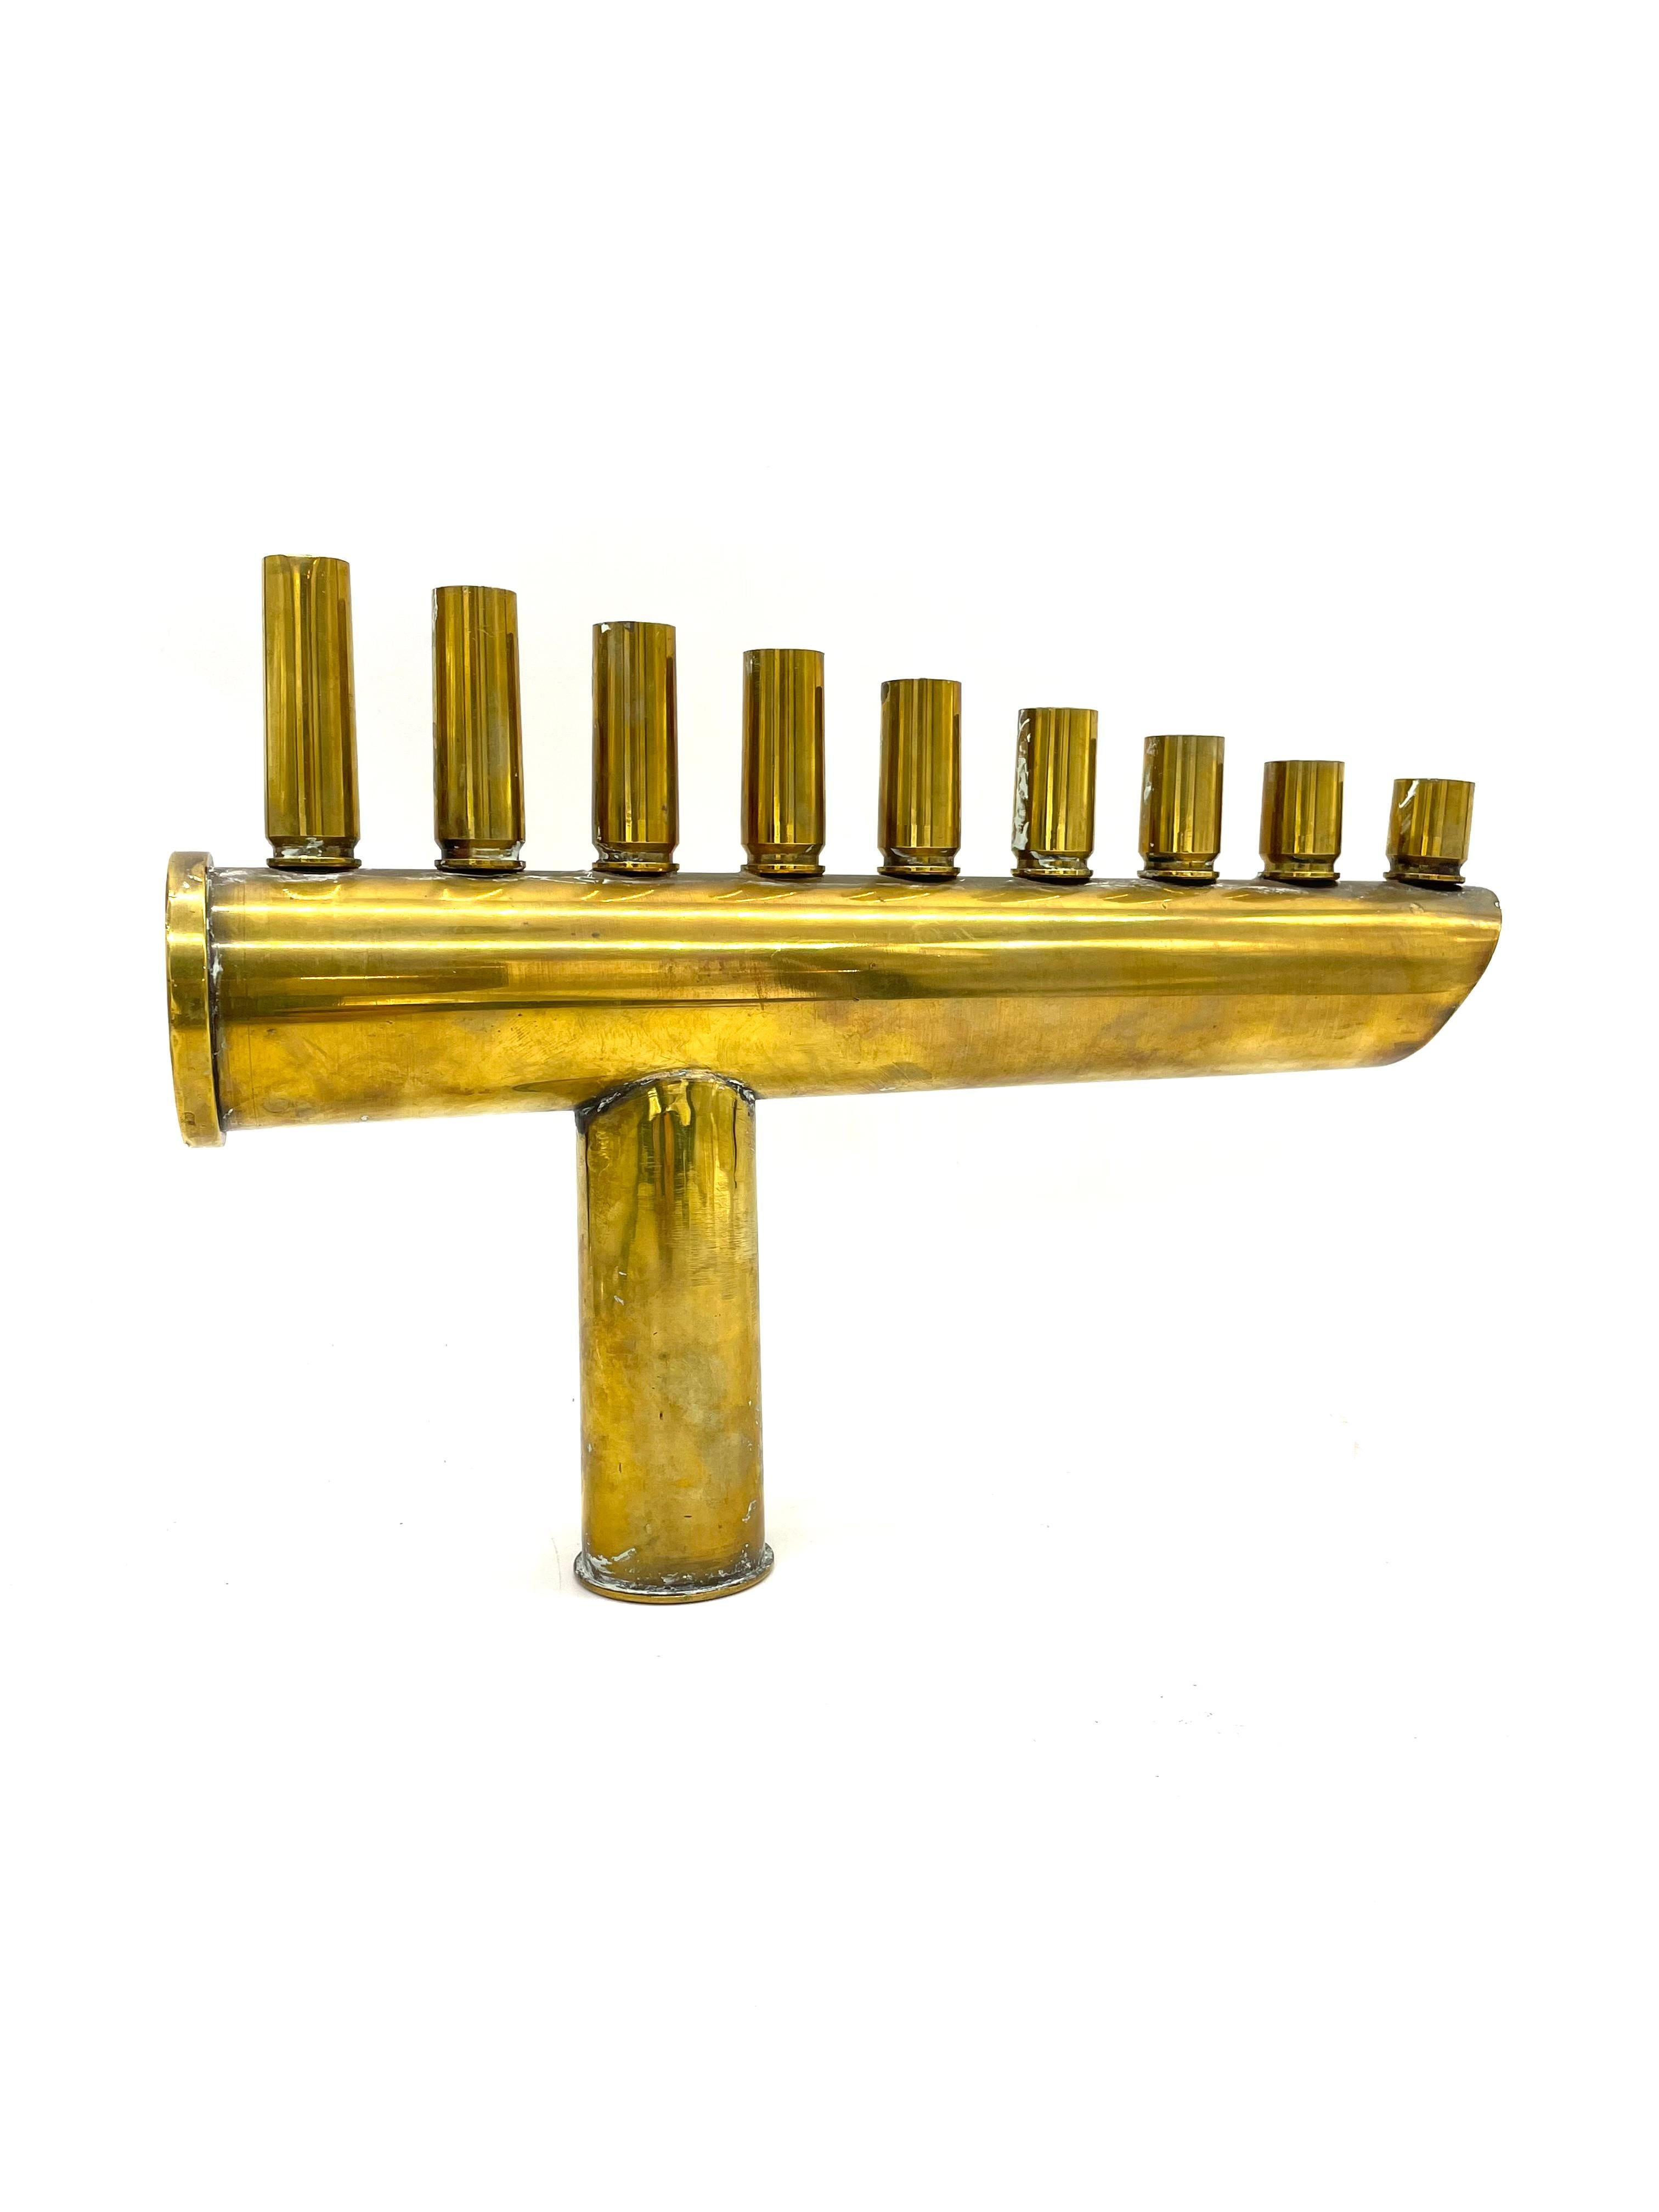 A brass Hanukkah lamp made by Israeli Defense soldiers features nine bullet and shell cartridges in form of candleholders. The bullet cartridges are screwed onto a shell cartridge, itself supported on two additional bullet cartridges. Candleholders